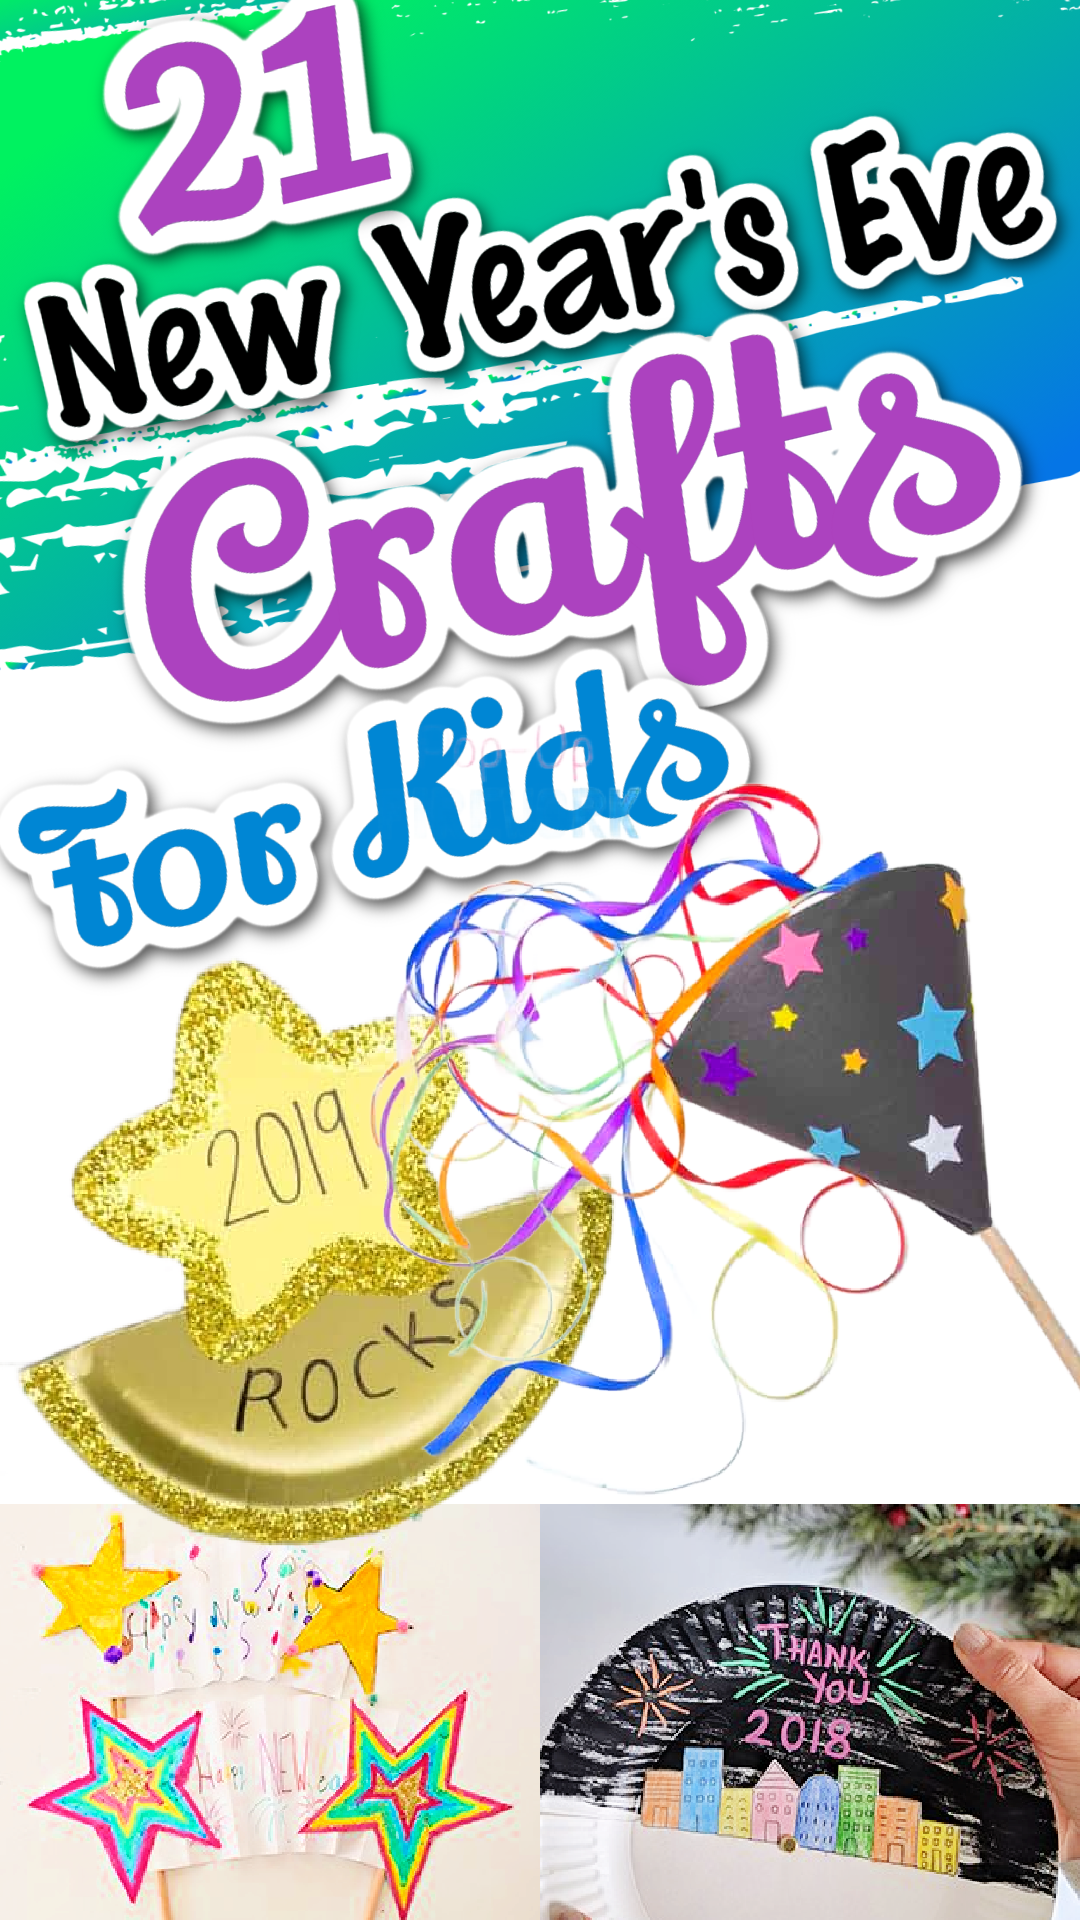 21 New Year’s Eve Crafts and Activities for Kids